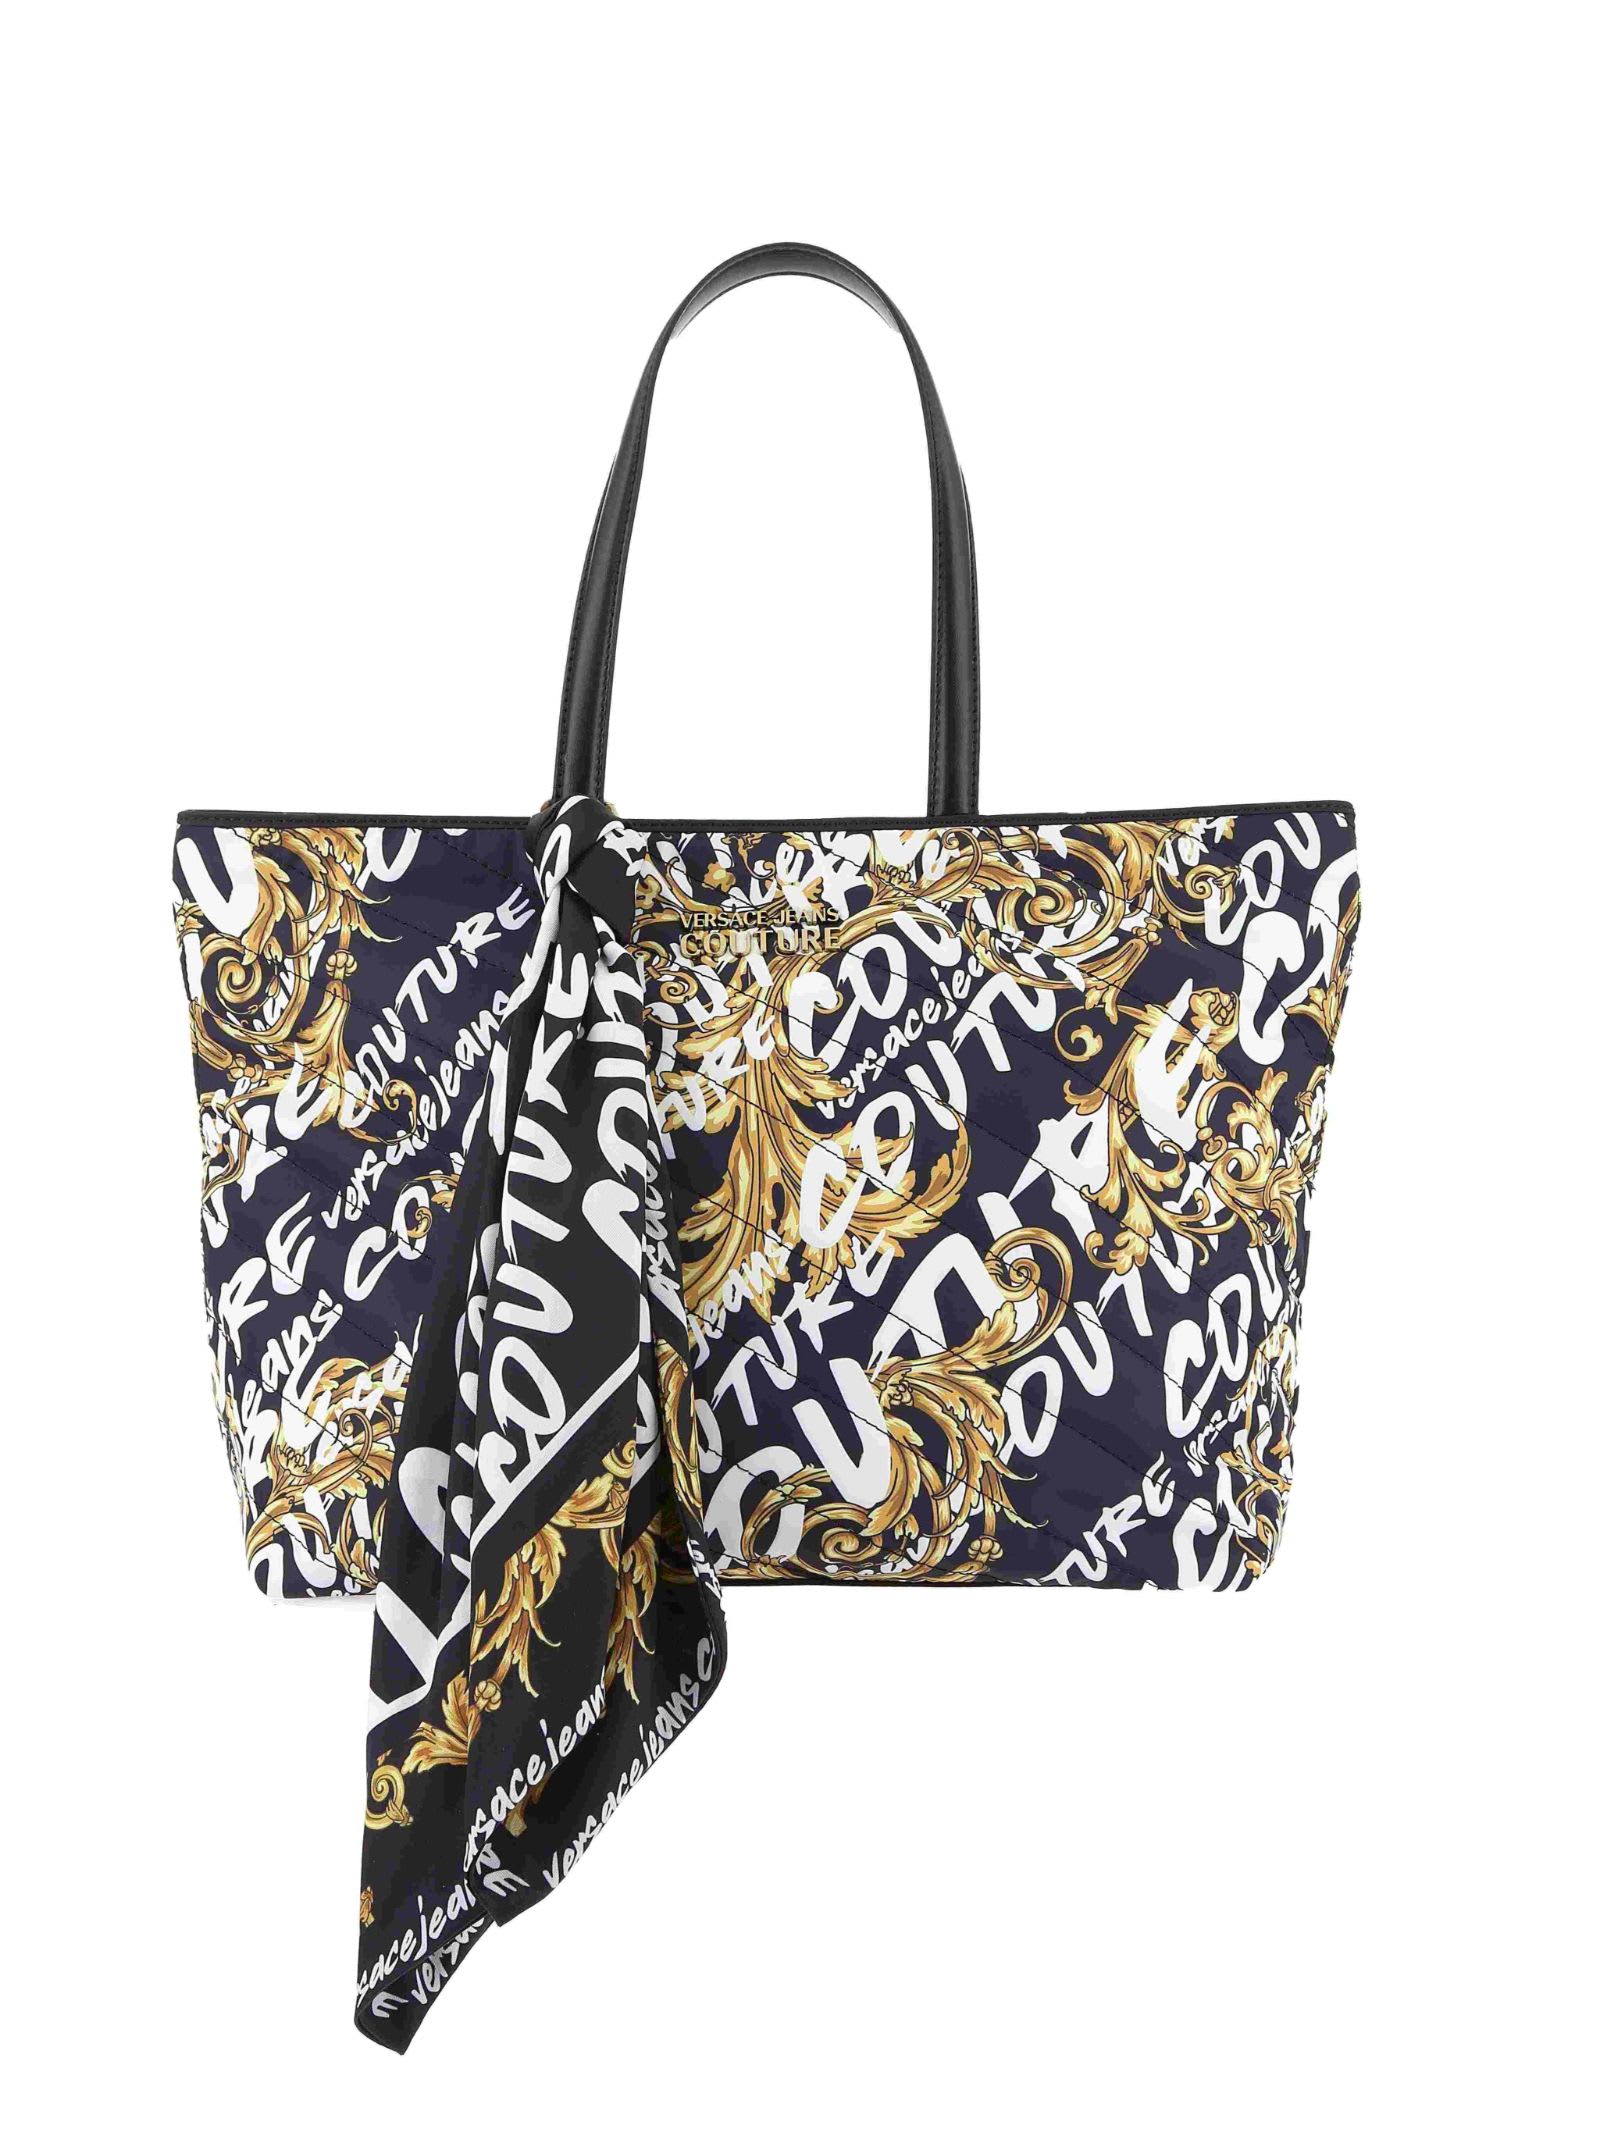 Versace Jeans Couture bags range a - thelma soft, sketch 9 couture quilted nylon